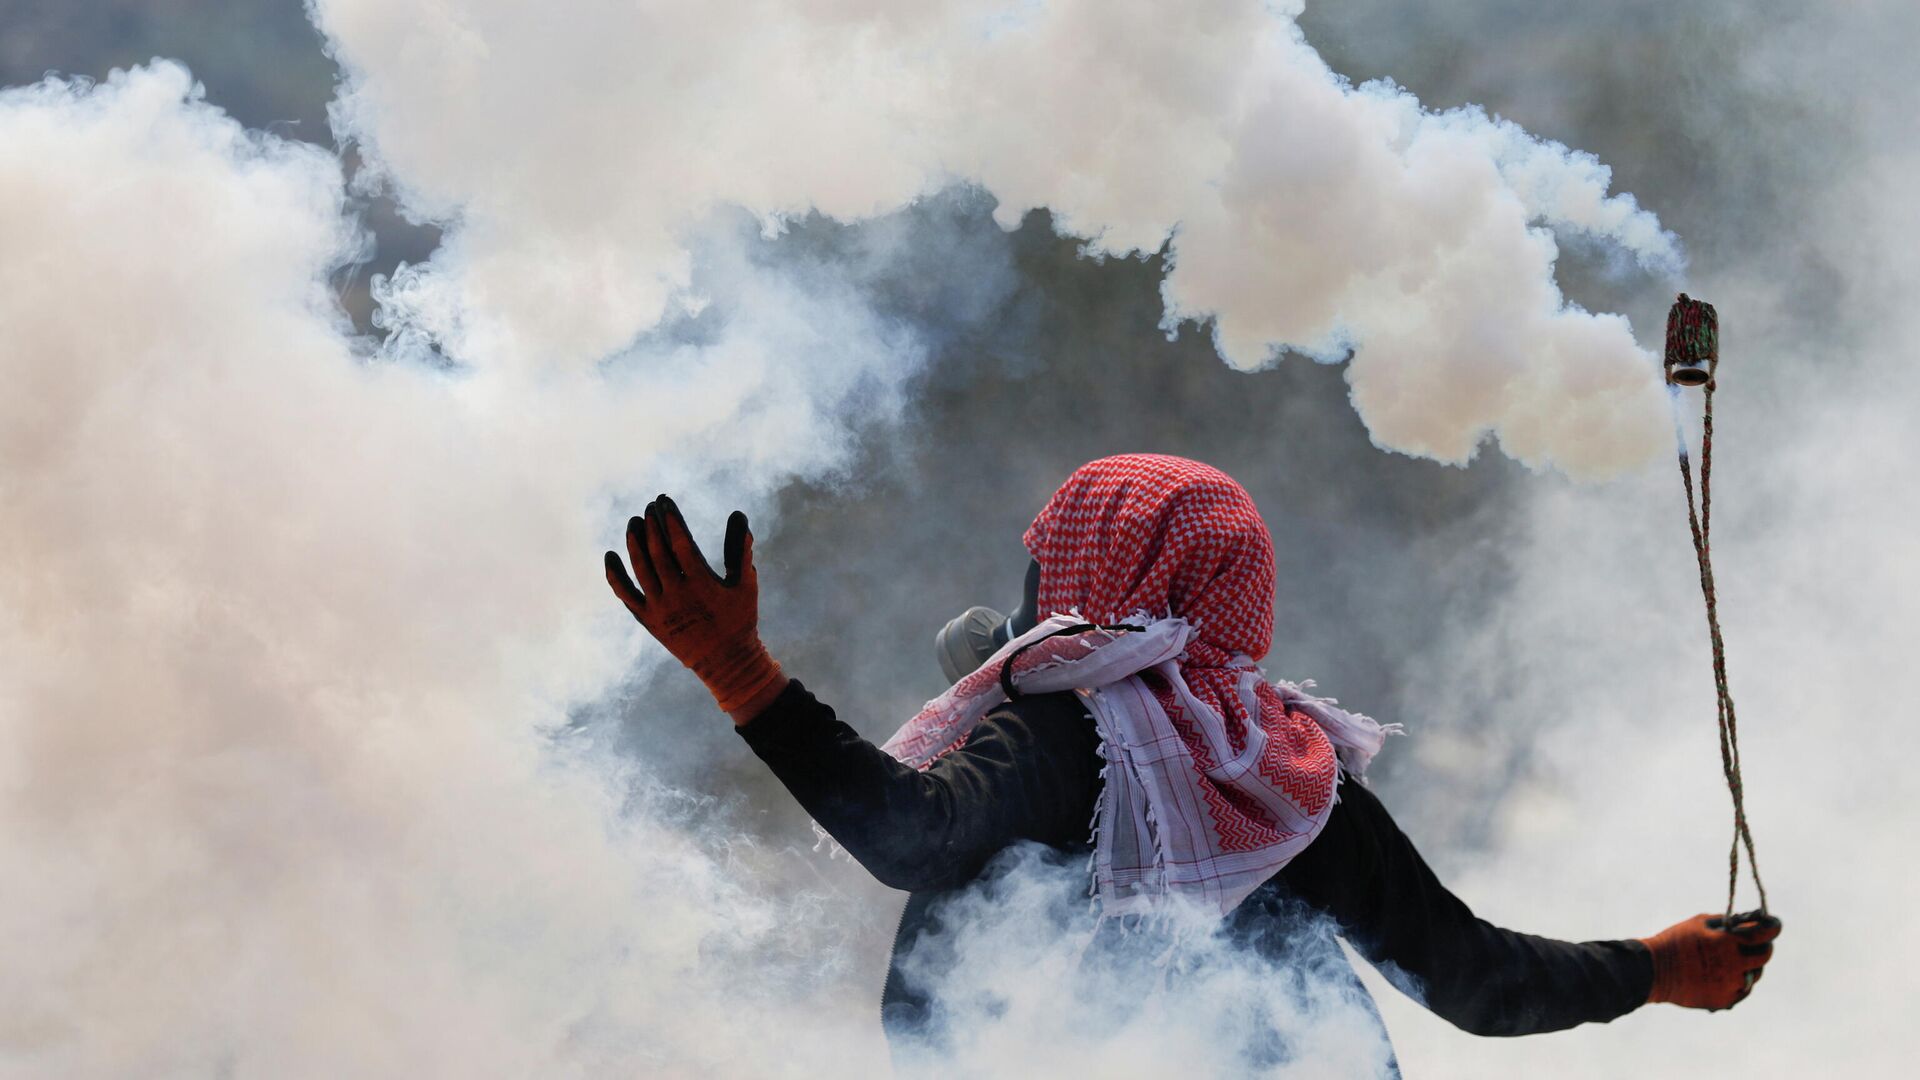 A Palestinian uses a sling as demonstrators clash with Israeli forces during a protest against Israeli settlements, in Beita, in the Israeli-occupied West Bank October 8, 2021. - Sputnik International, 1920, 08.10.2021